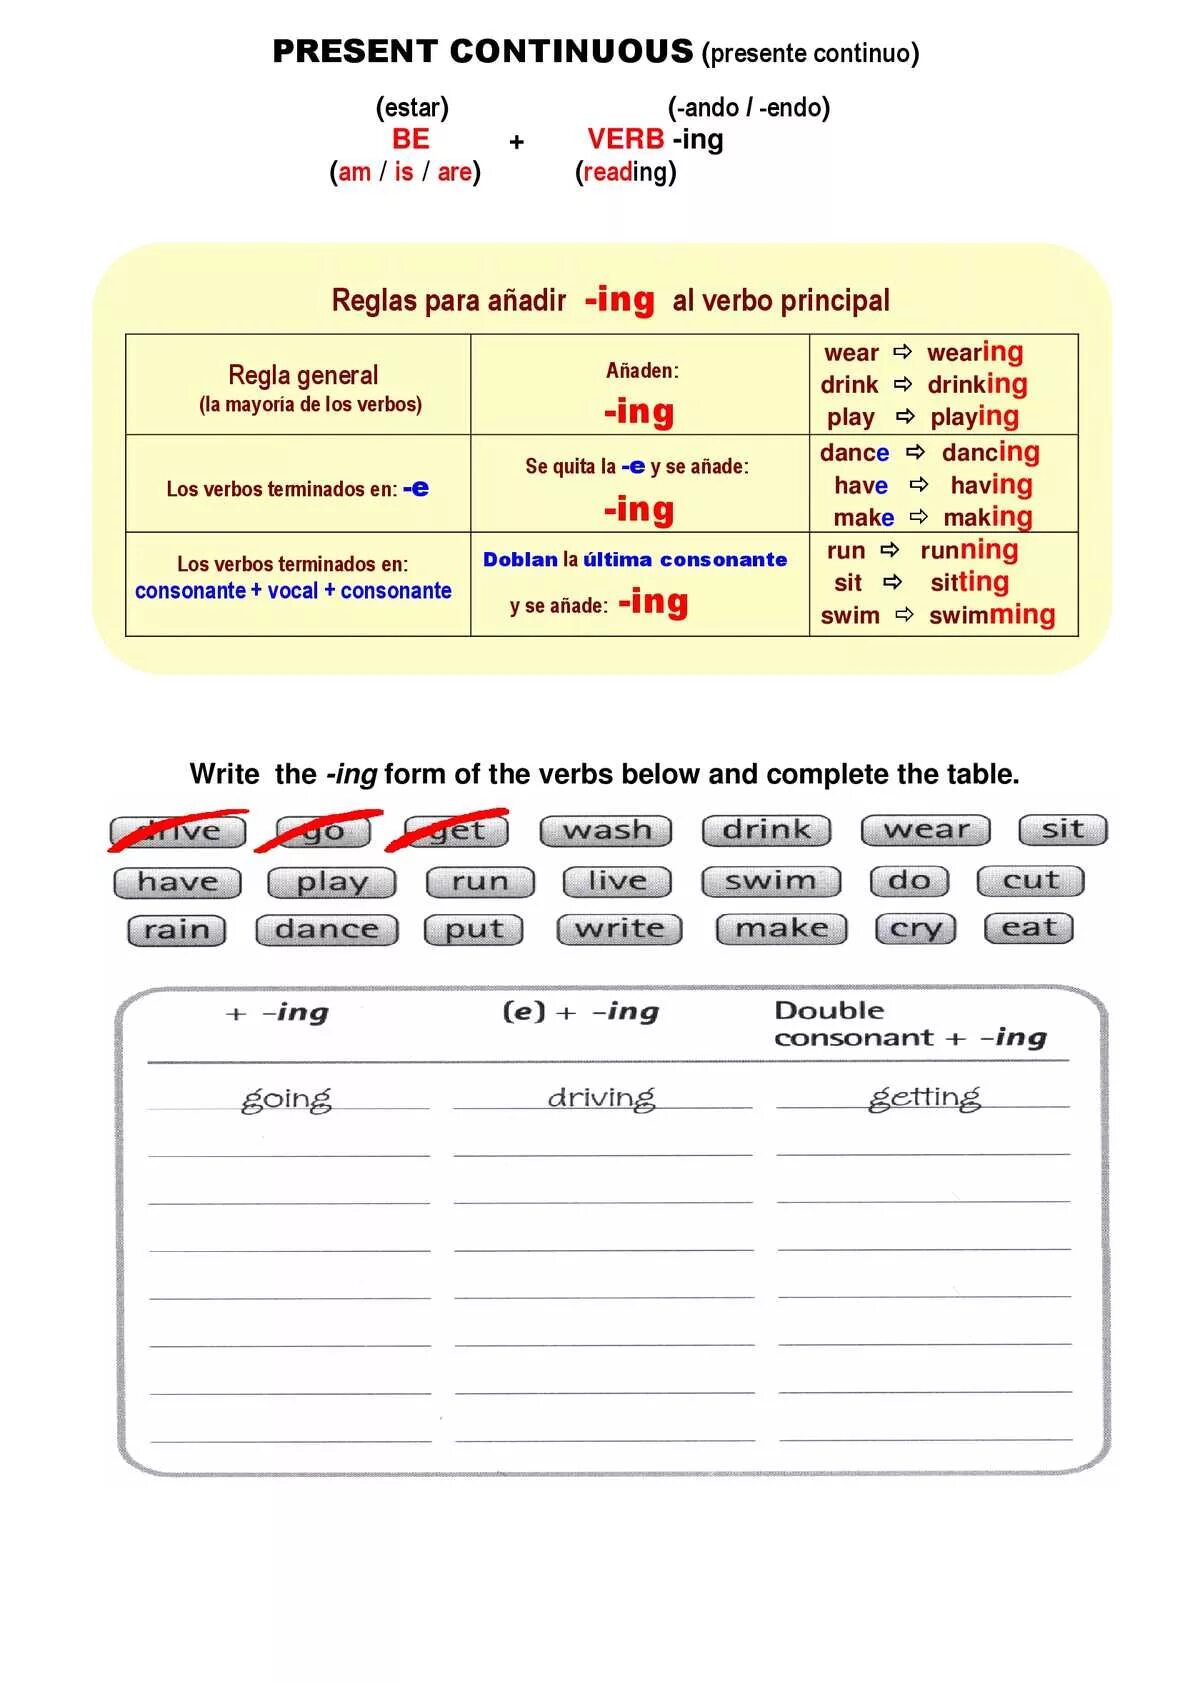 Write the ing form. Present Continuous ing form. Окончание ing в present Continuous. Present Continuous правила окончания. Present Continuous правописание.